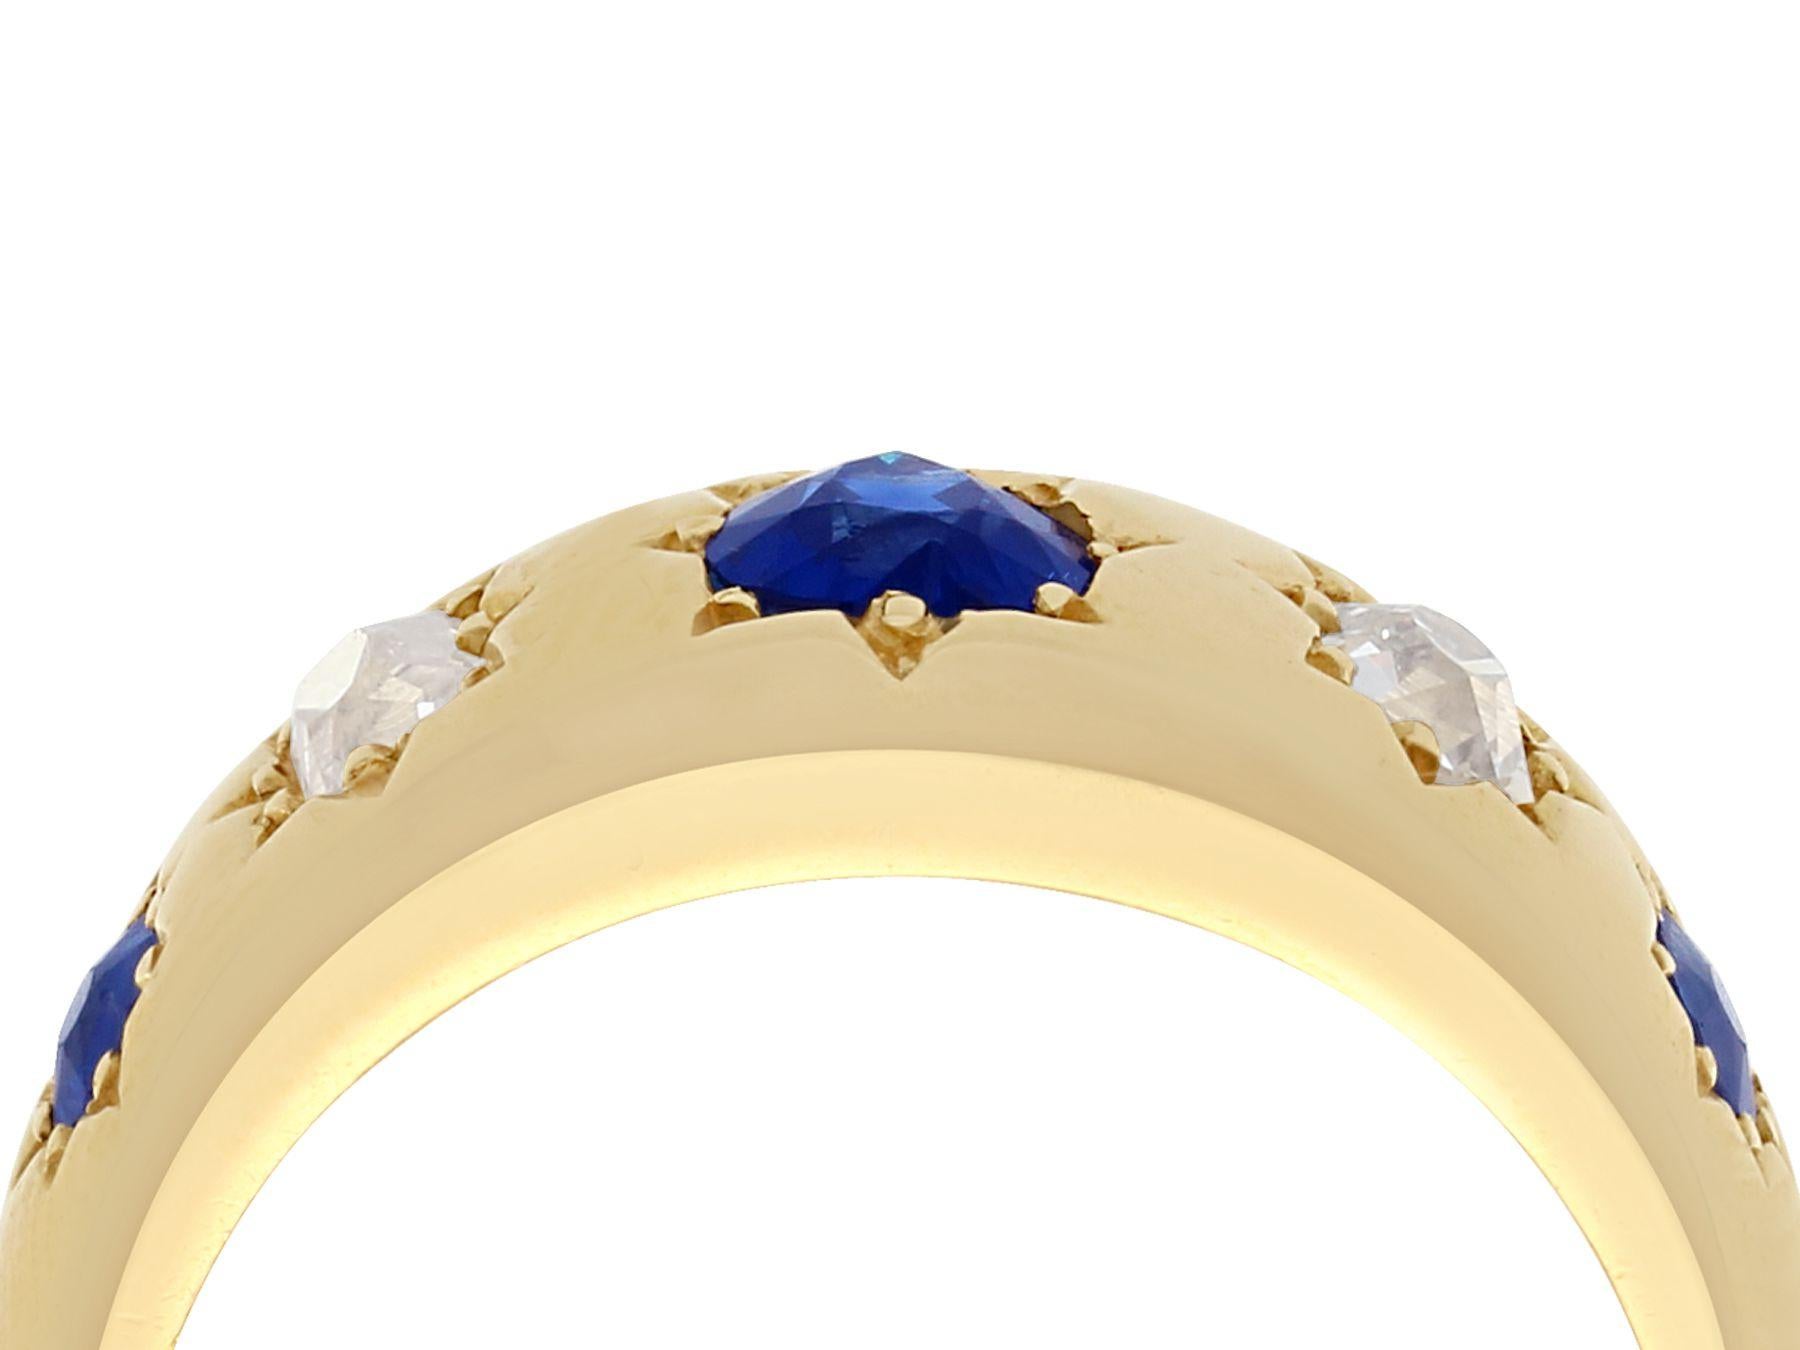 A fine and impressive antique Victorian 0.73 carat natural sapphire and 0.40 carat diamond, 18 karat yellow gold dress ring; part of our antique jewelry and estate jewelry collections.

This impressive sapphire and diamond ring has been crafted in